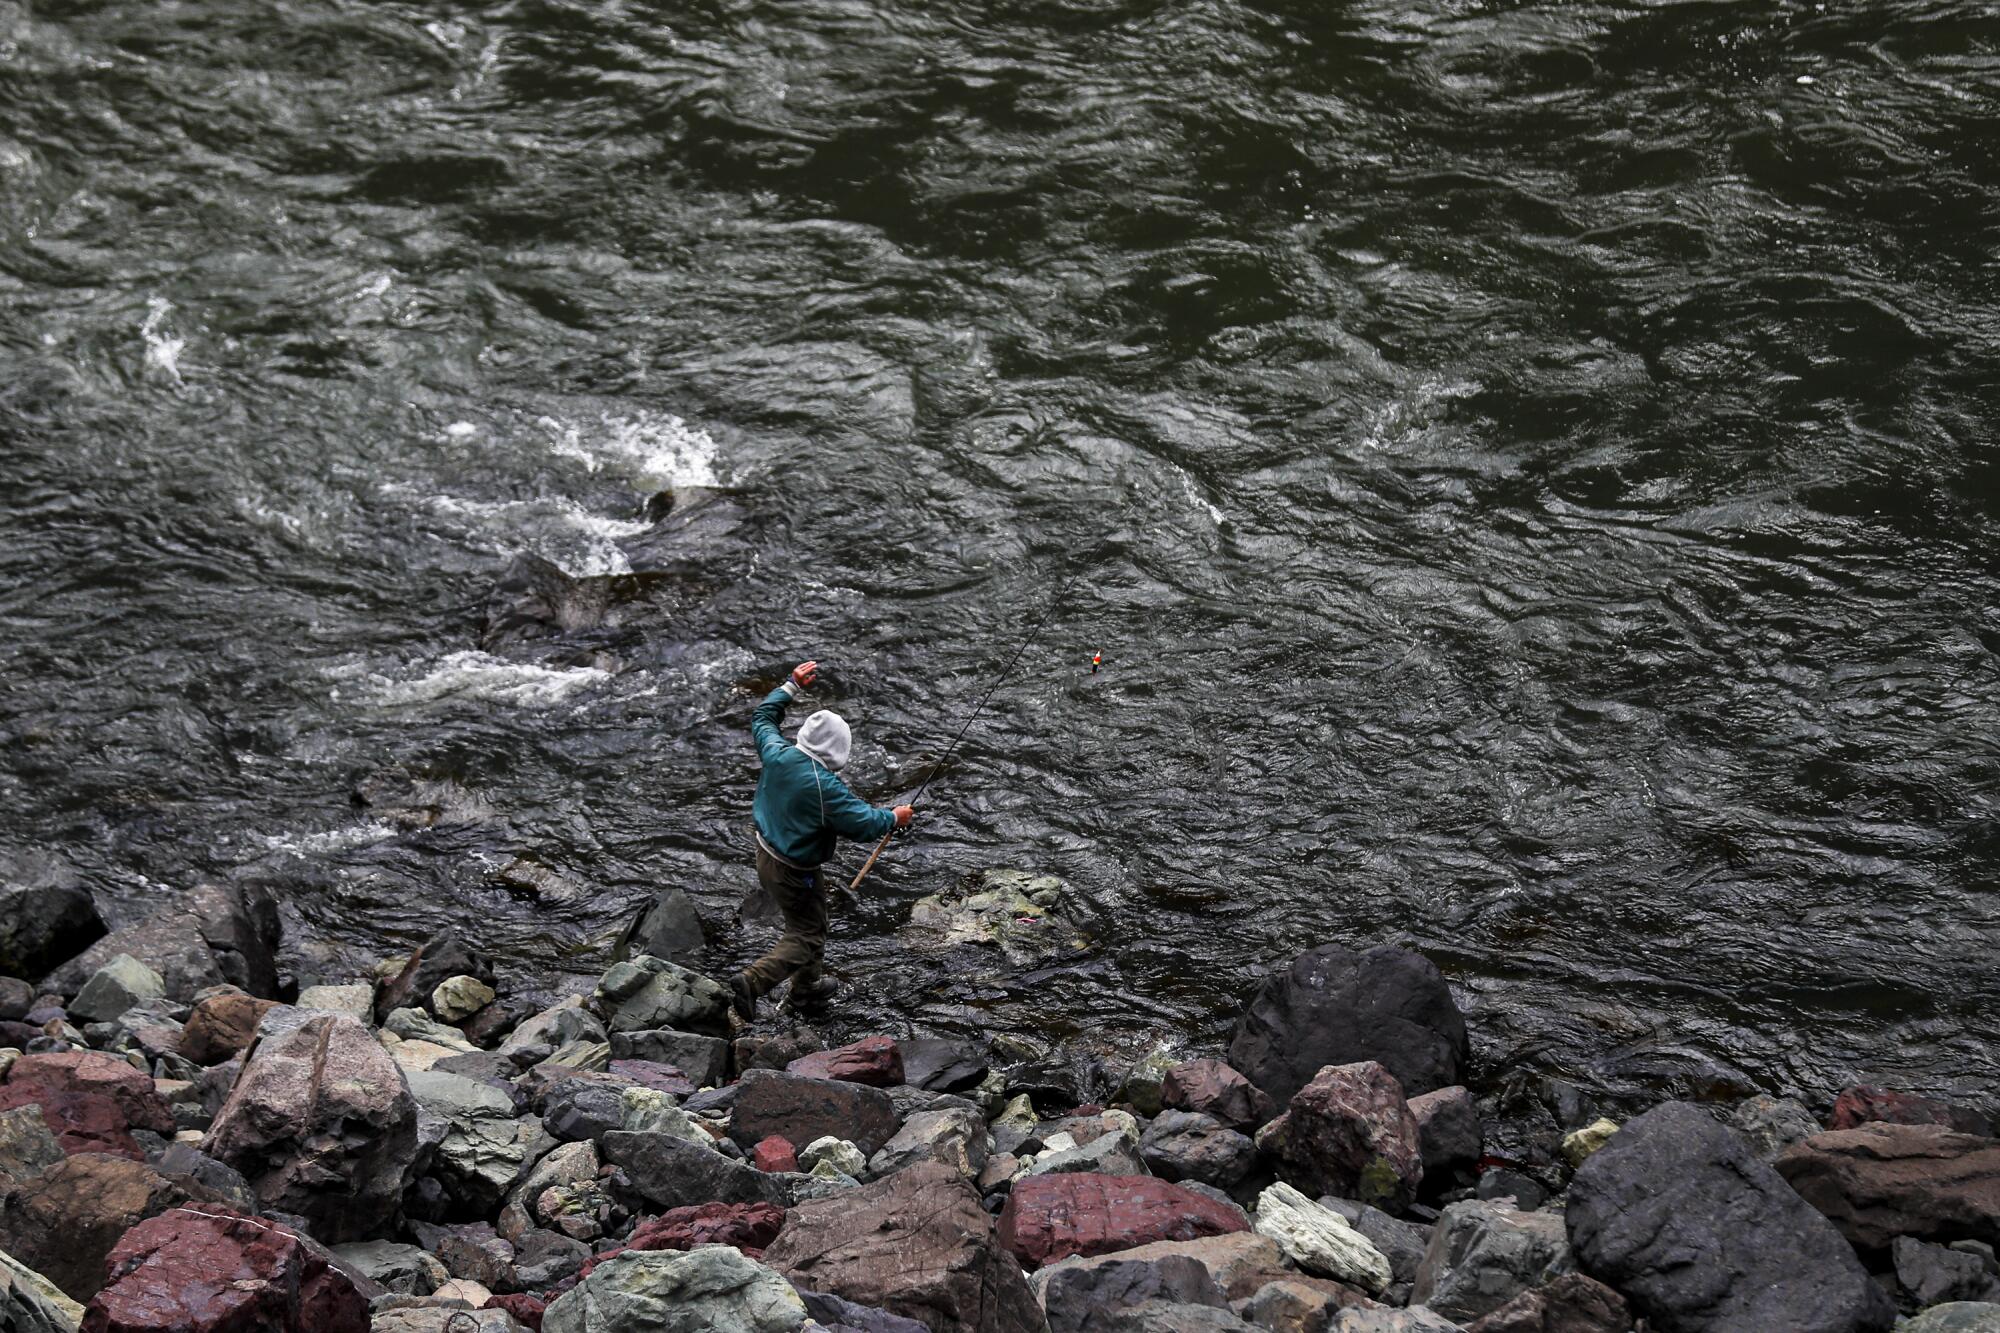 A person fishes on the rocky shoreline of the Snake River near Hells Canyon Dam.